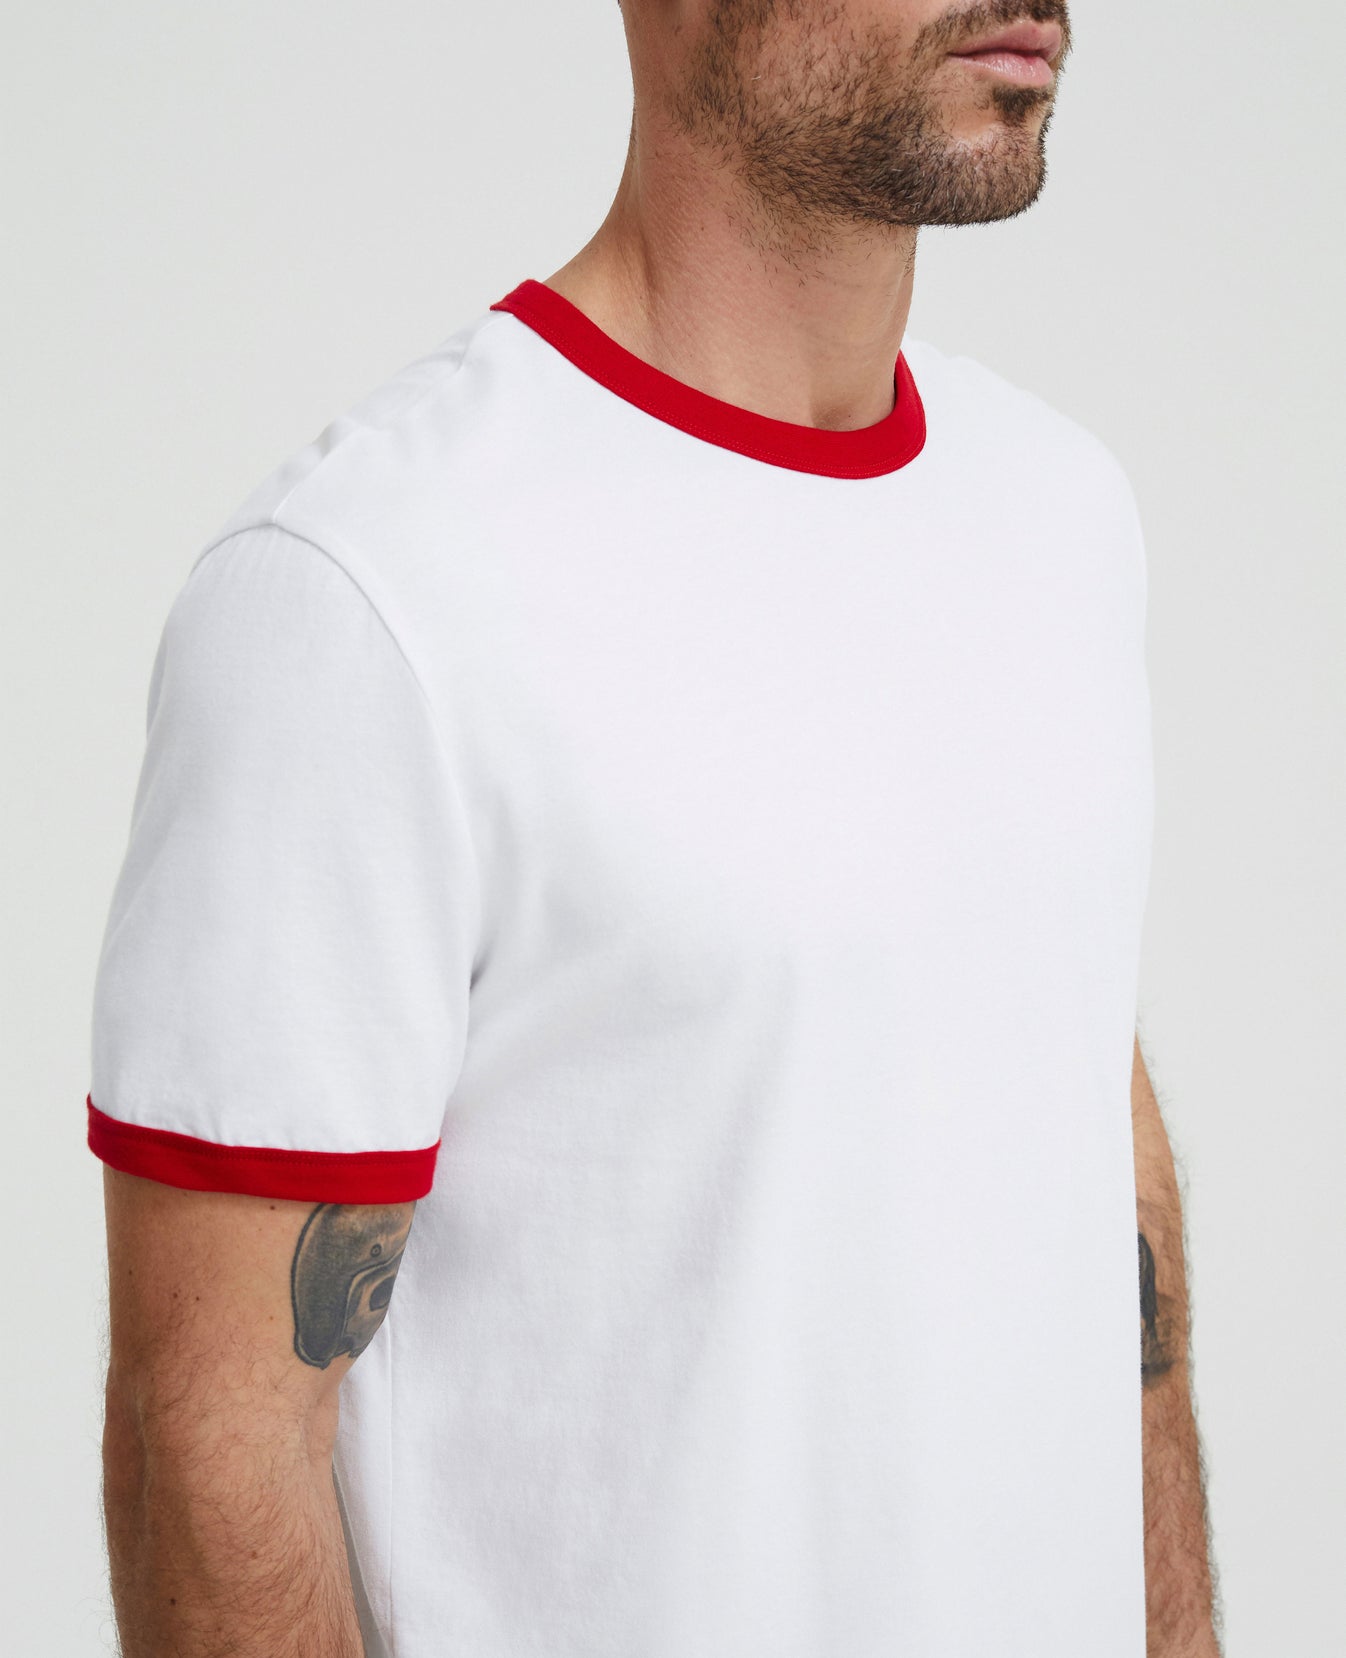 Anders Ringer Tee True White/Clever Red Short Sleeve Tee Men Tops Photo 6